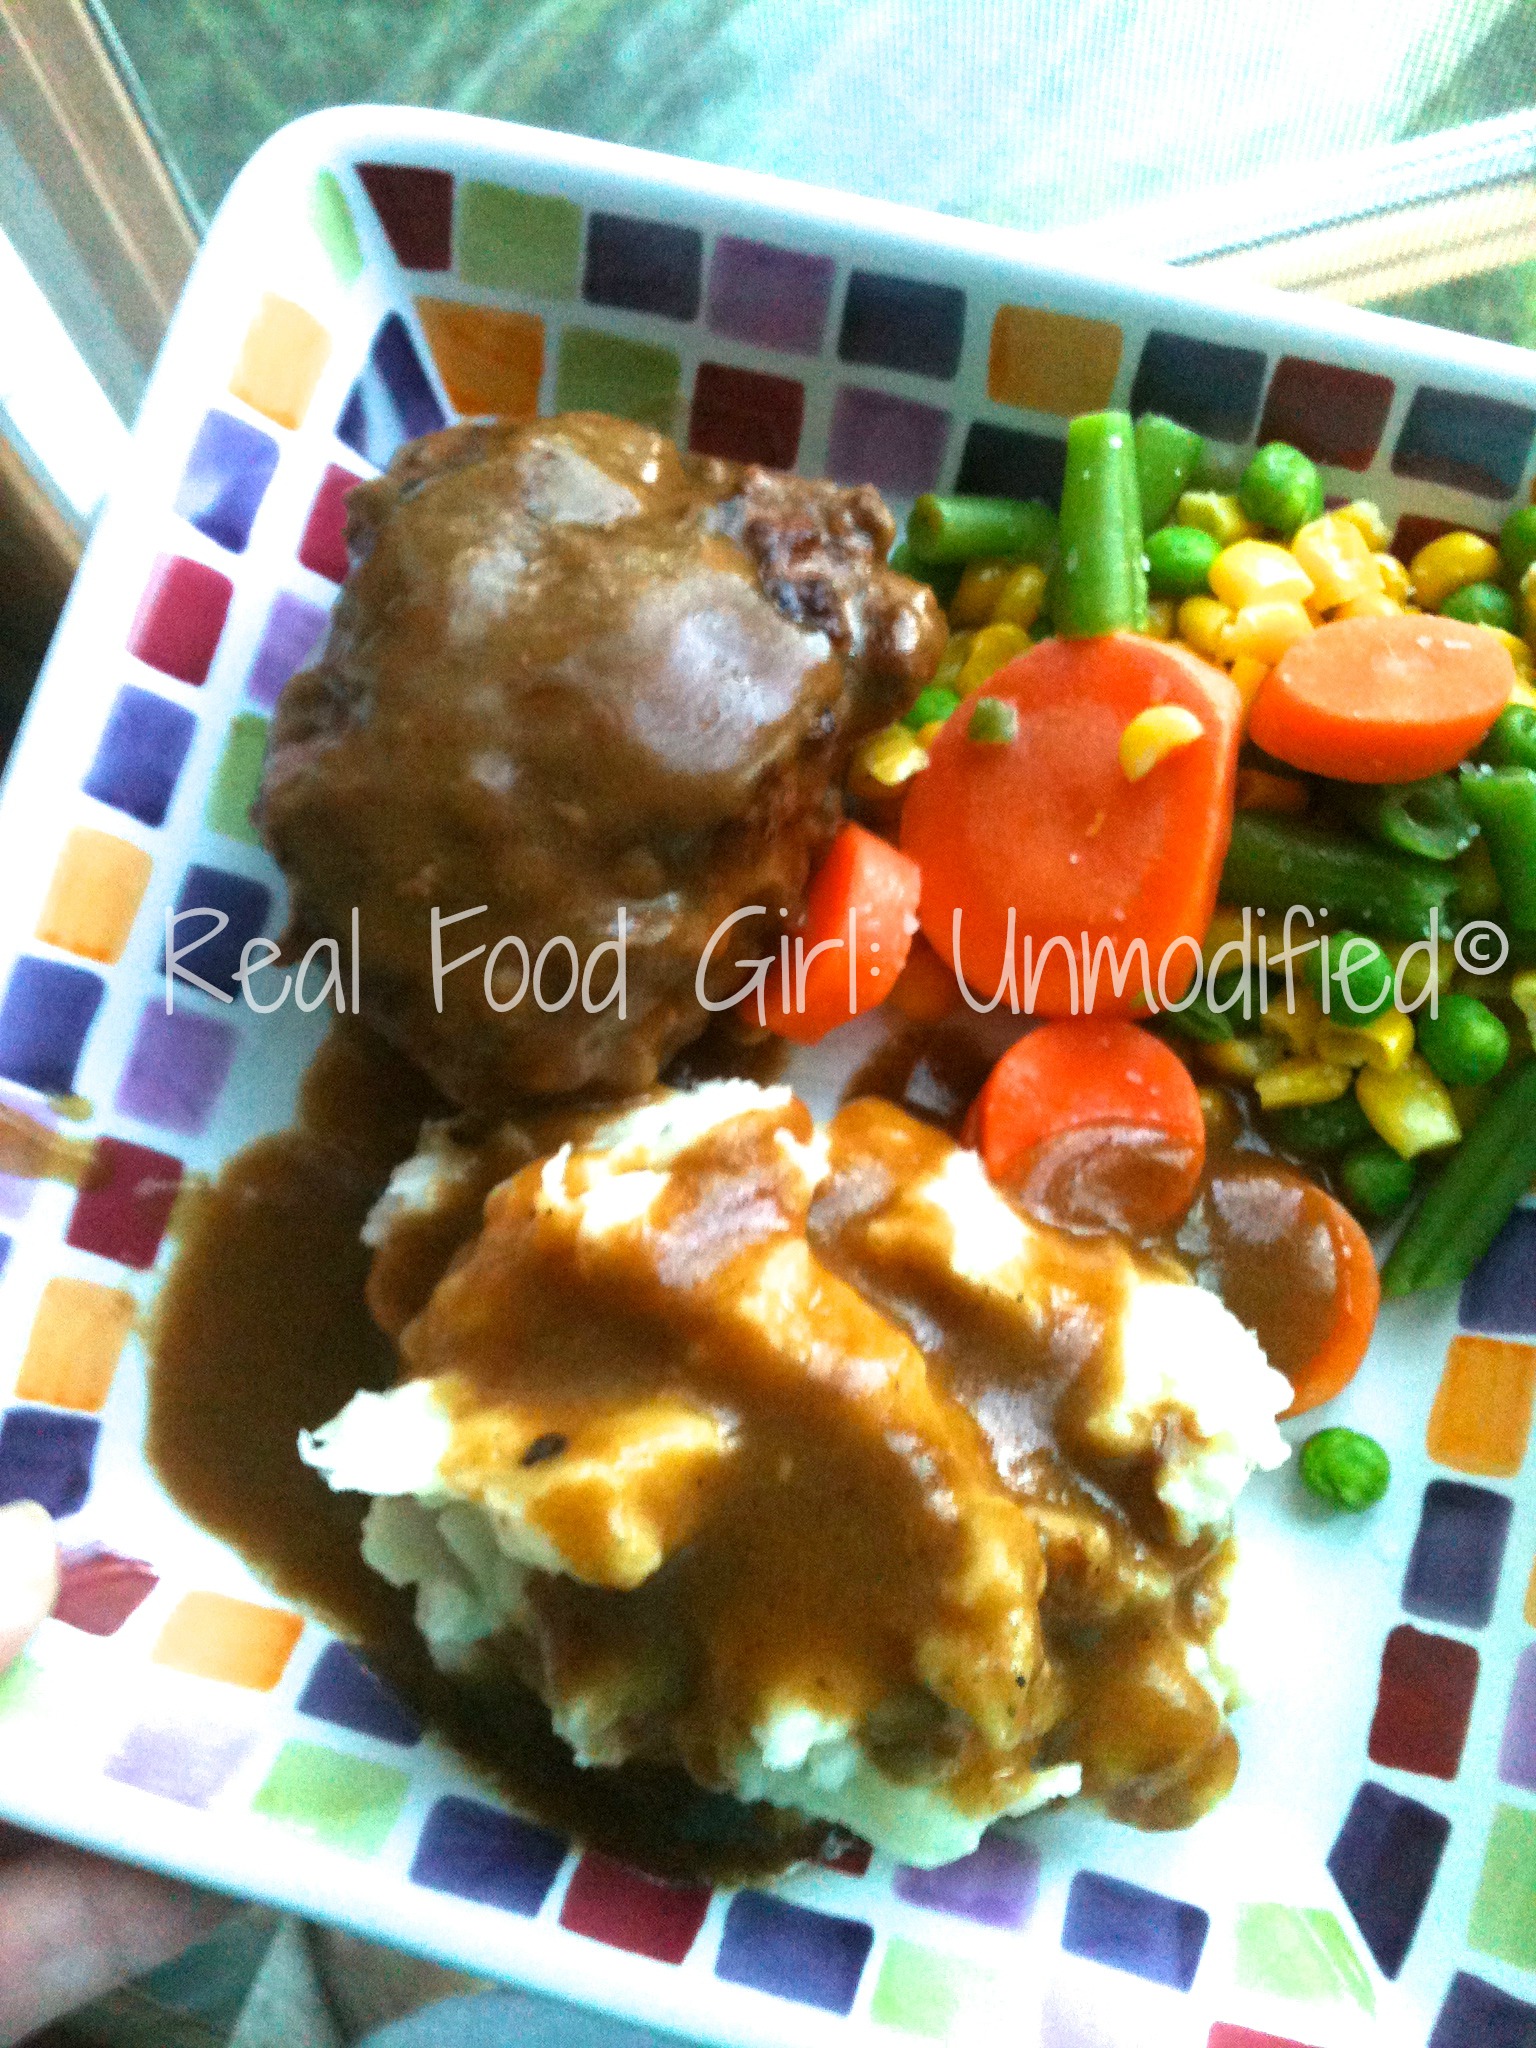 Ground Sirloin Steaks with Brown Gravy- Homecookin' organic food from Real Food Girl: Unmodified